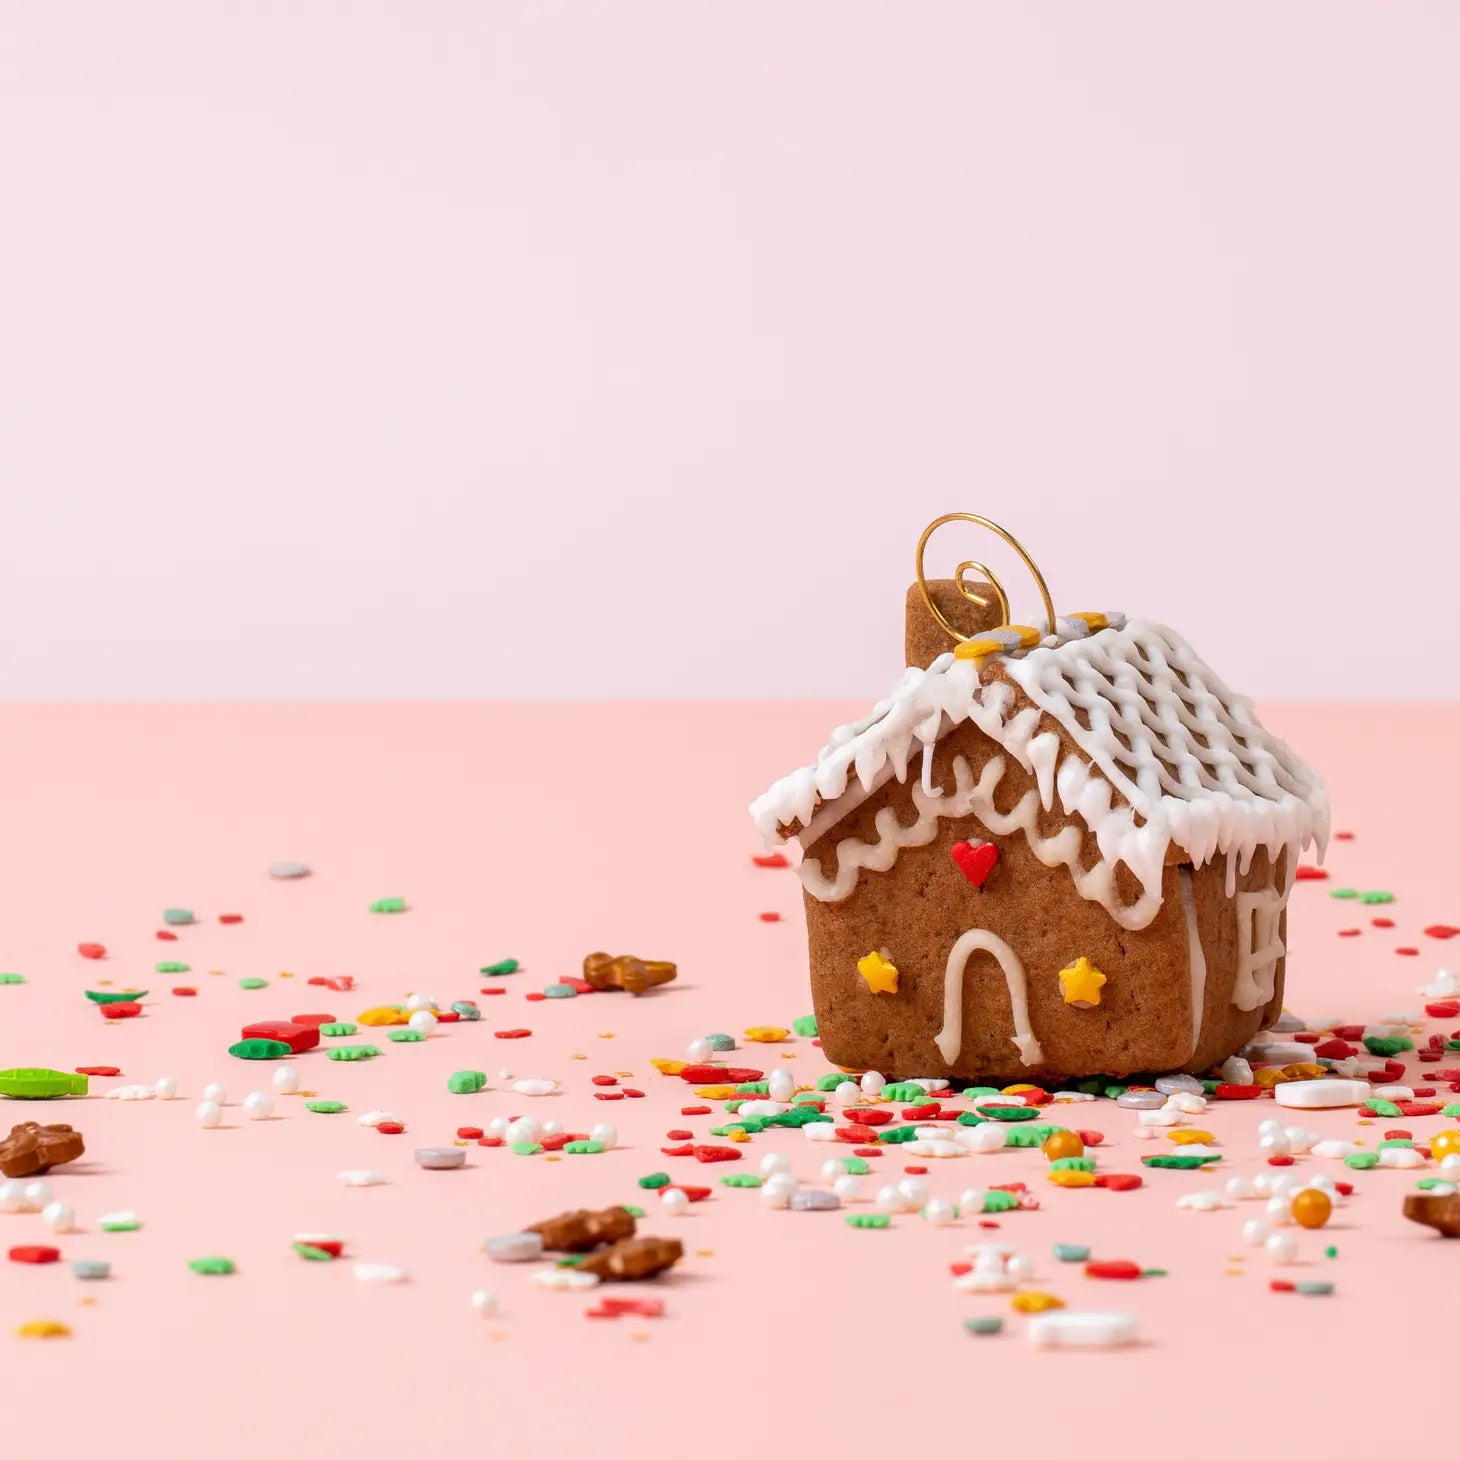 Gingerbread Tiny Home Kit